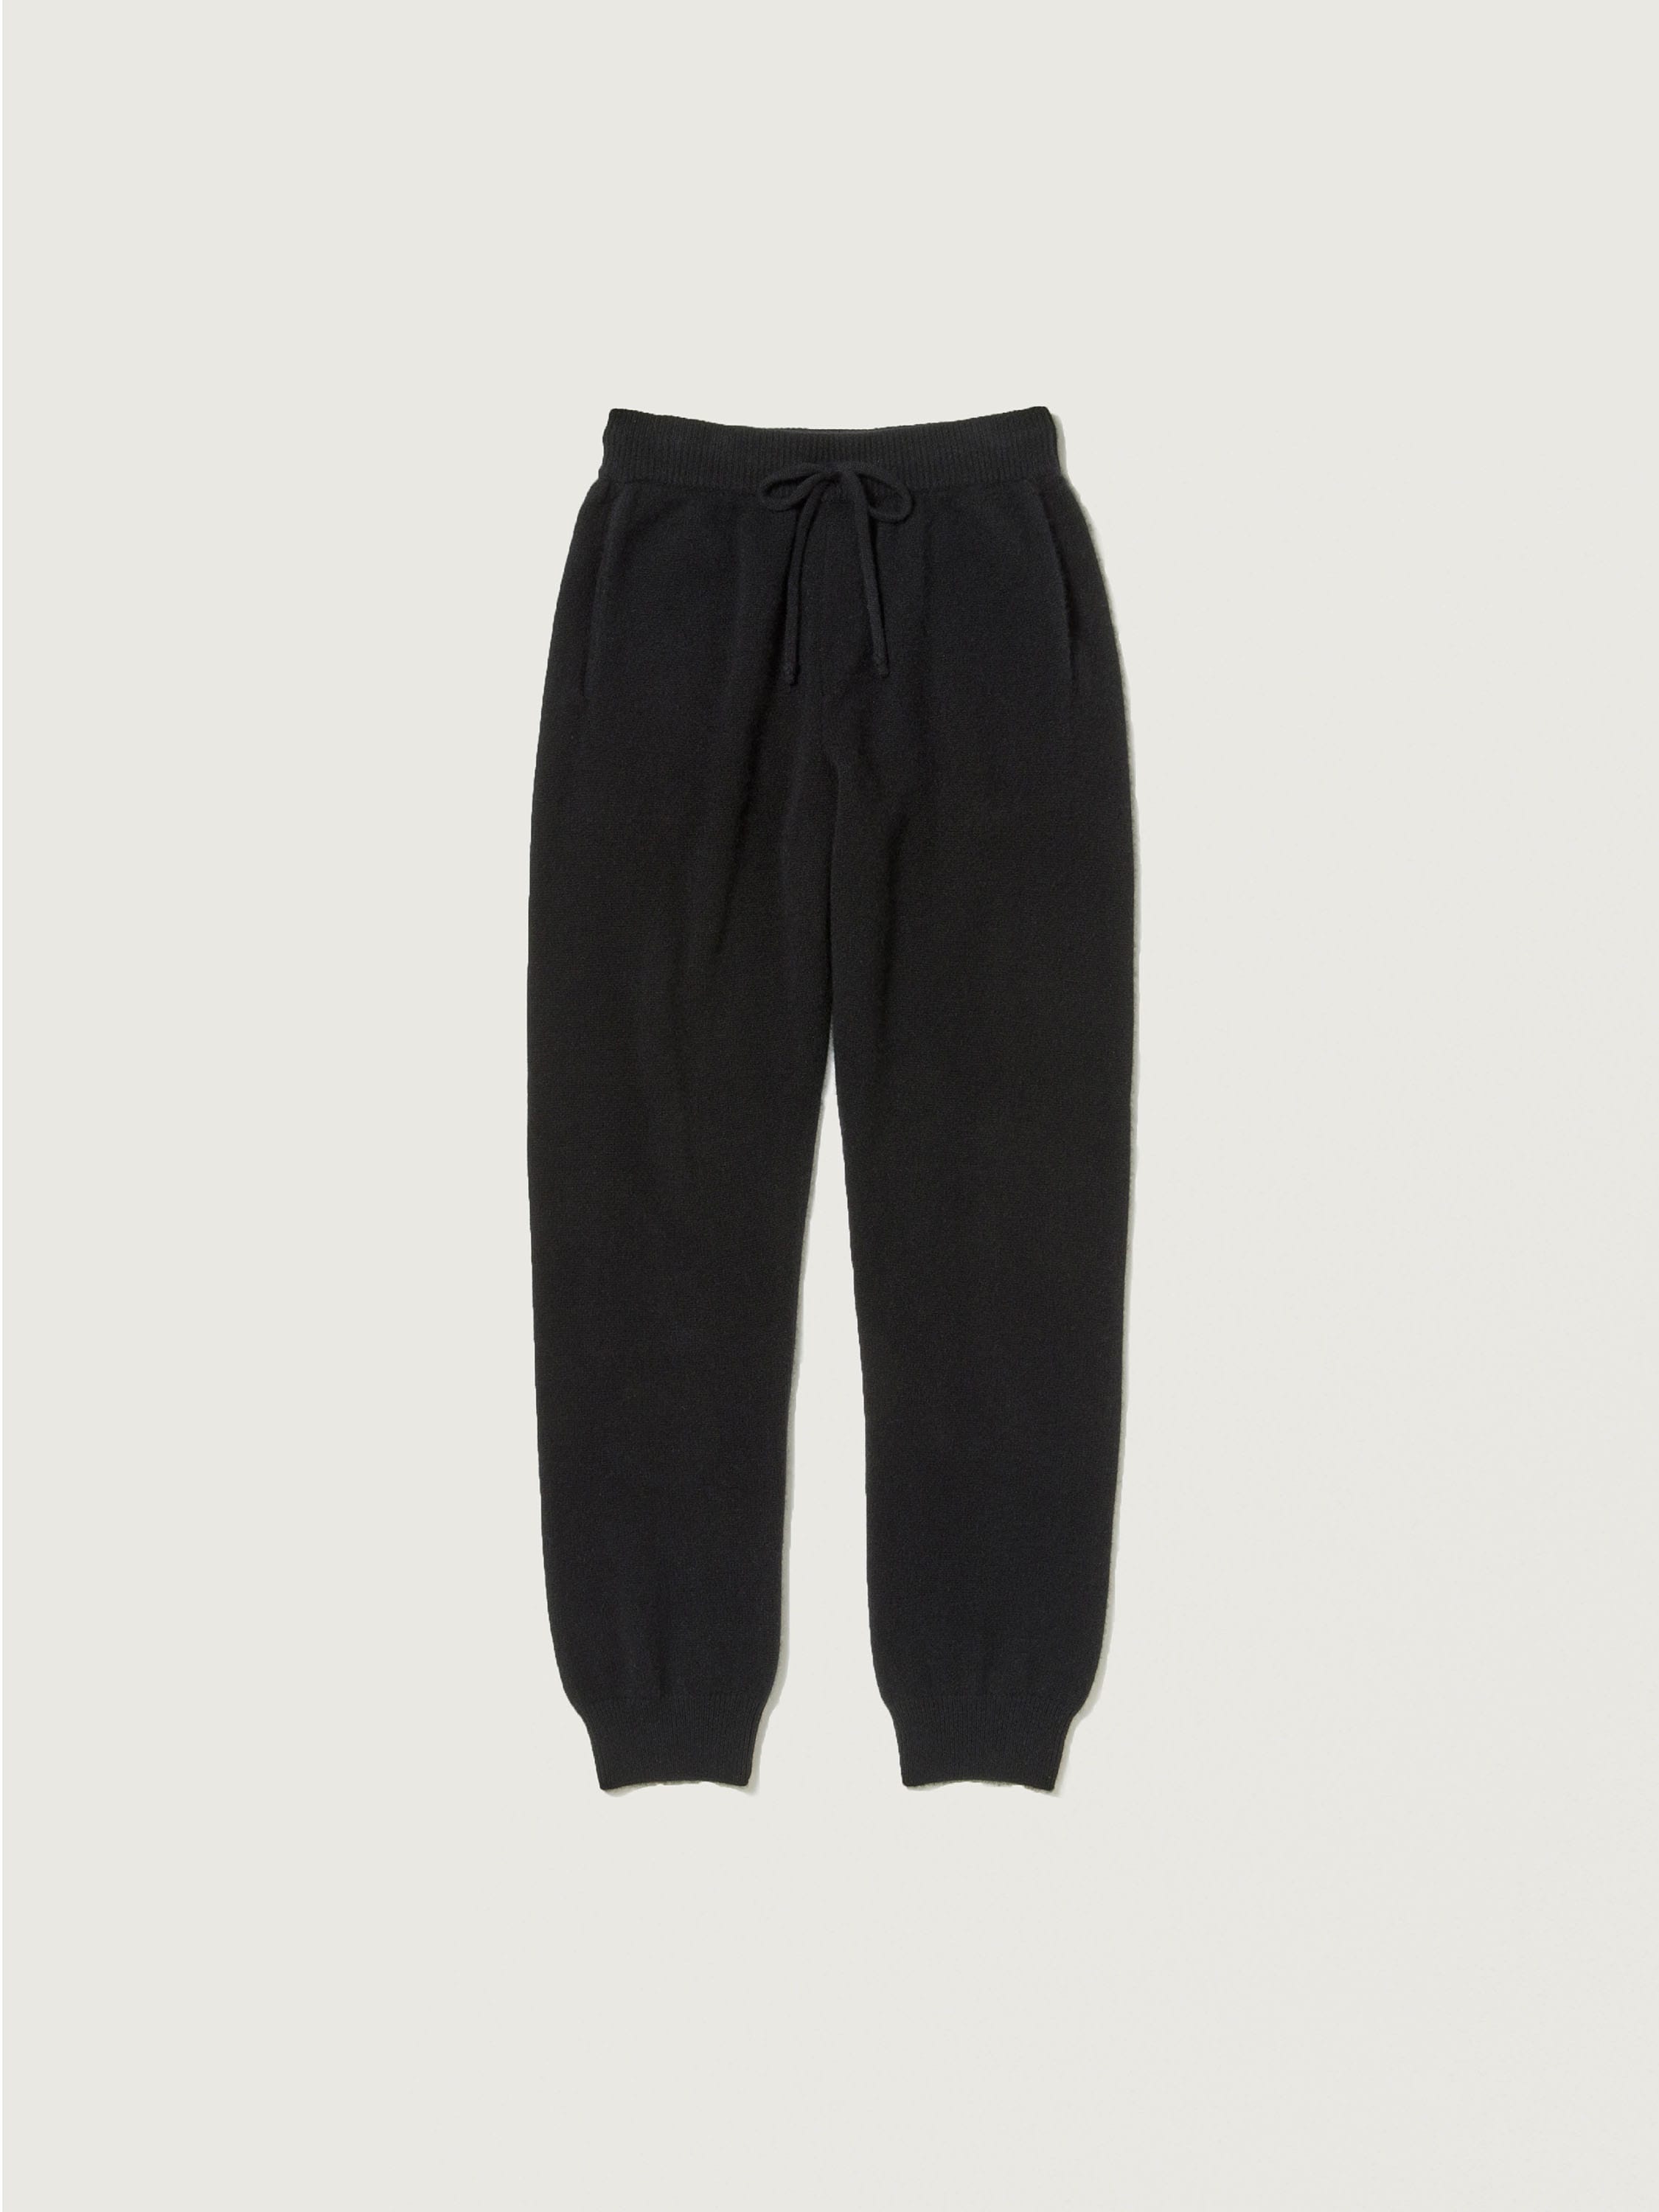 BABY CASHMERE KNIT PANTS - AURALEE Official Website